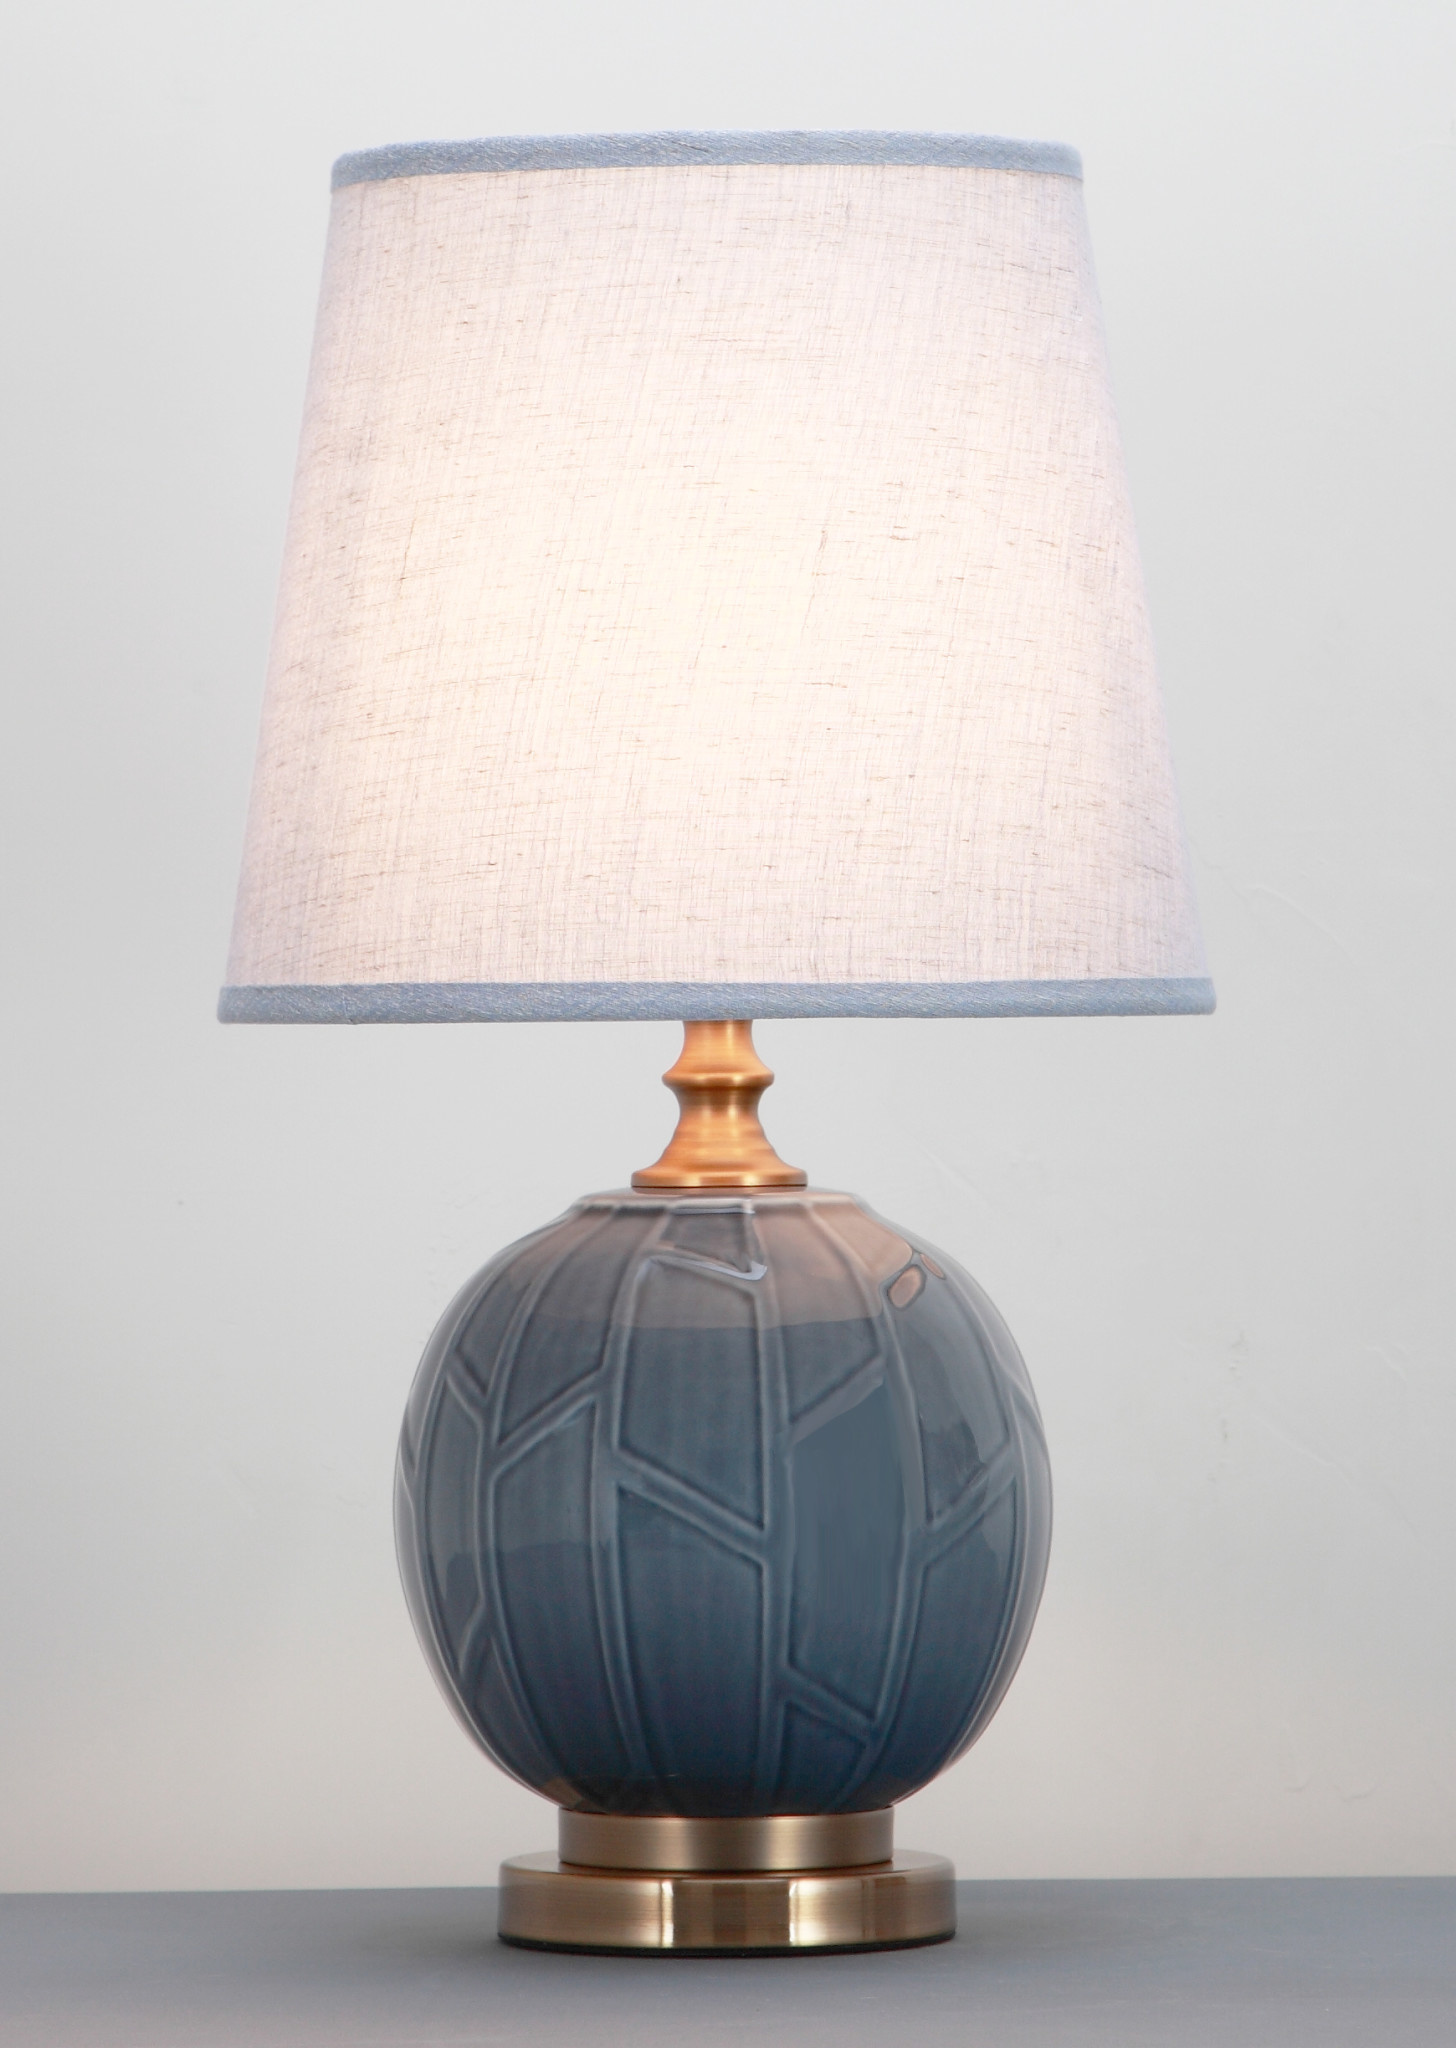 Chinese Table Lamp Porcelain Relief, Chinese Table Lamps Australian